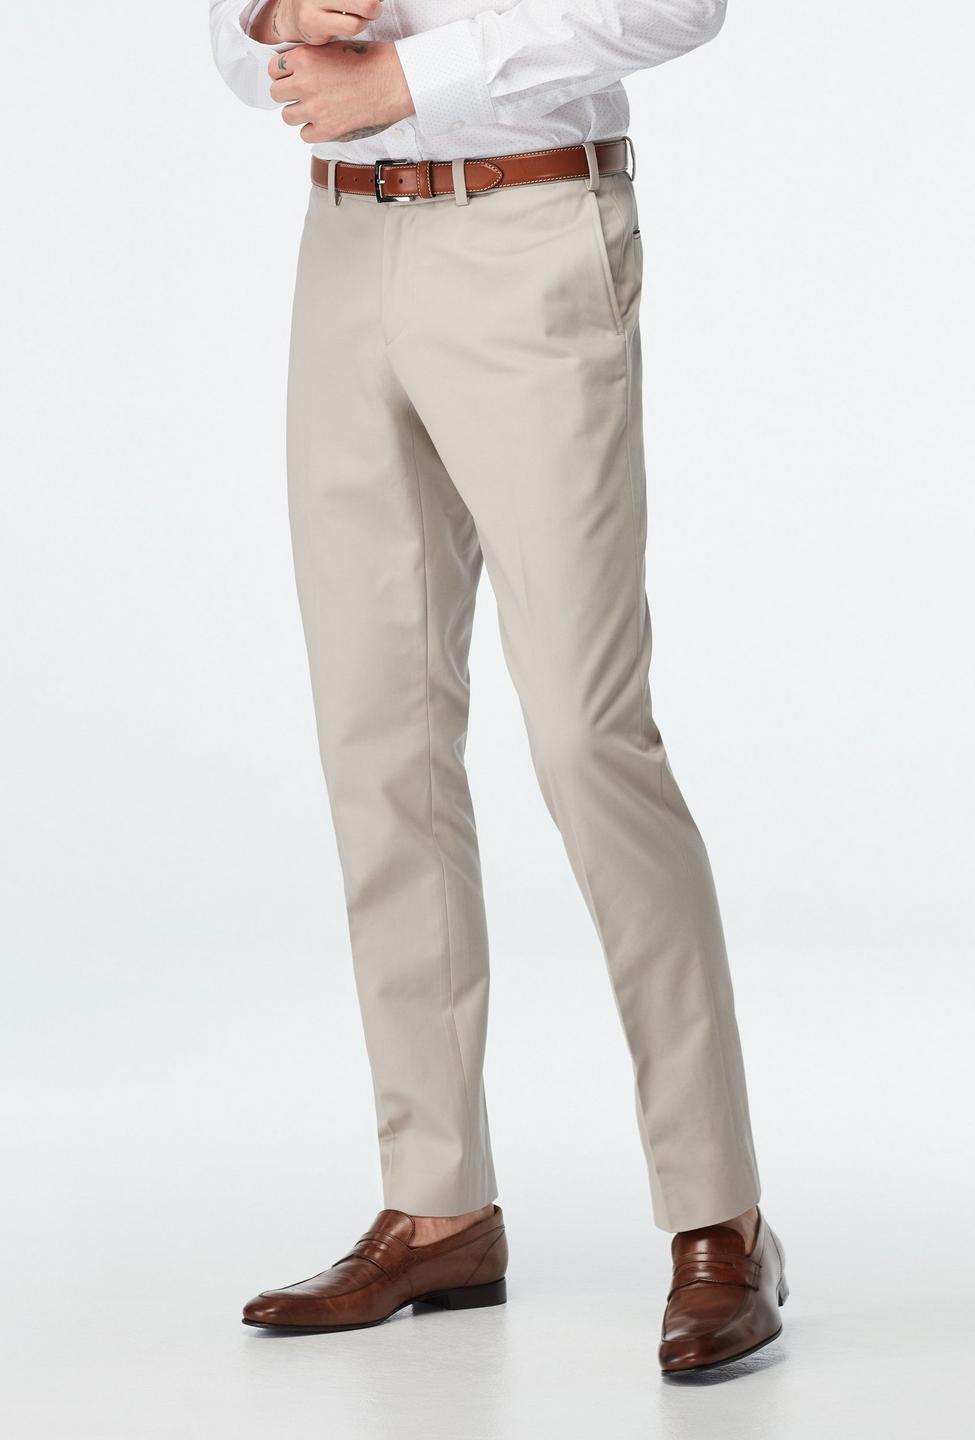 Gray pants - Halton Solid Design from Premium Indochino Collection